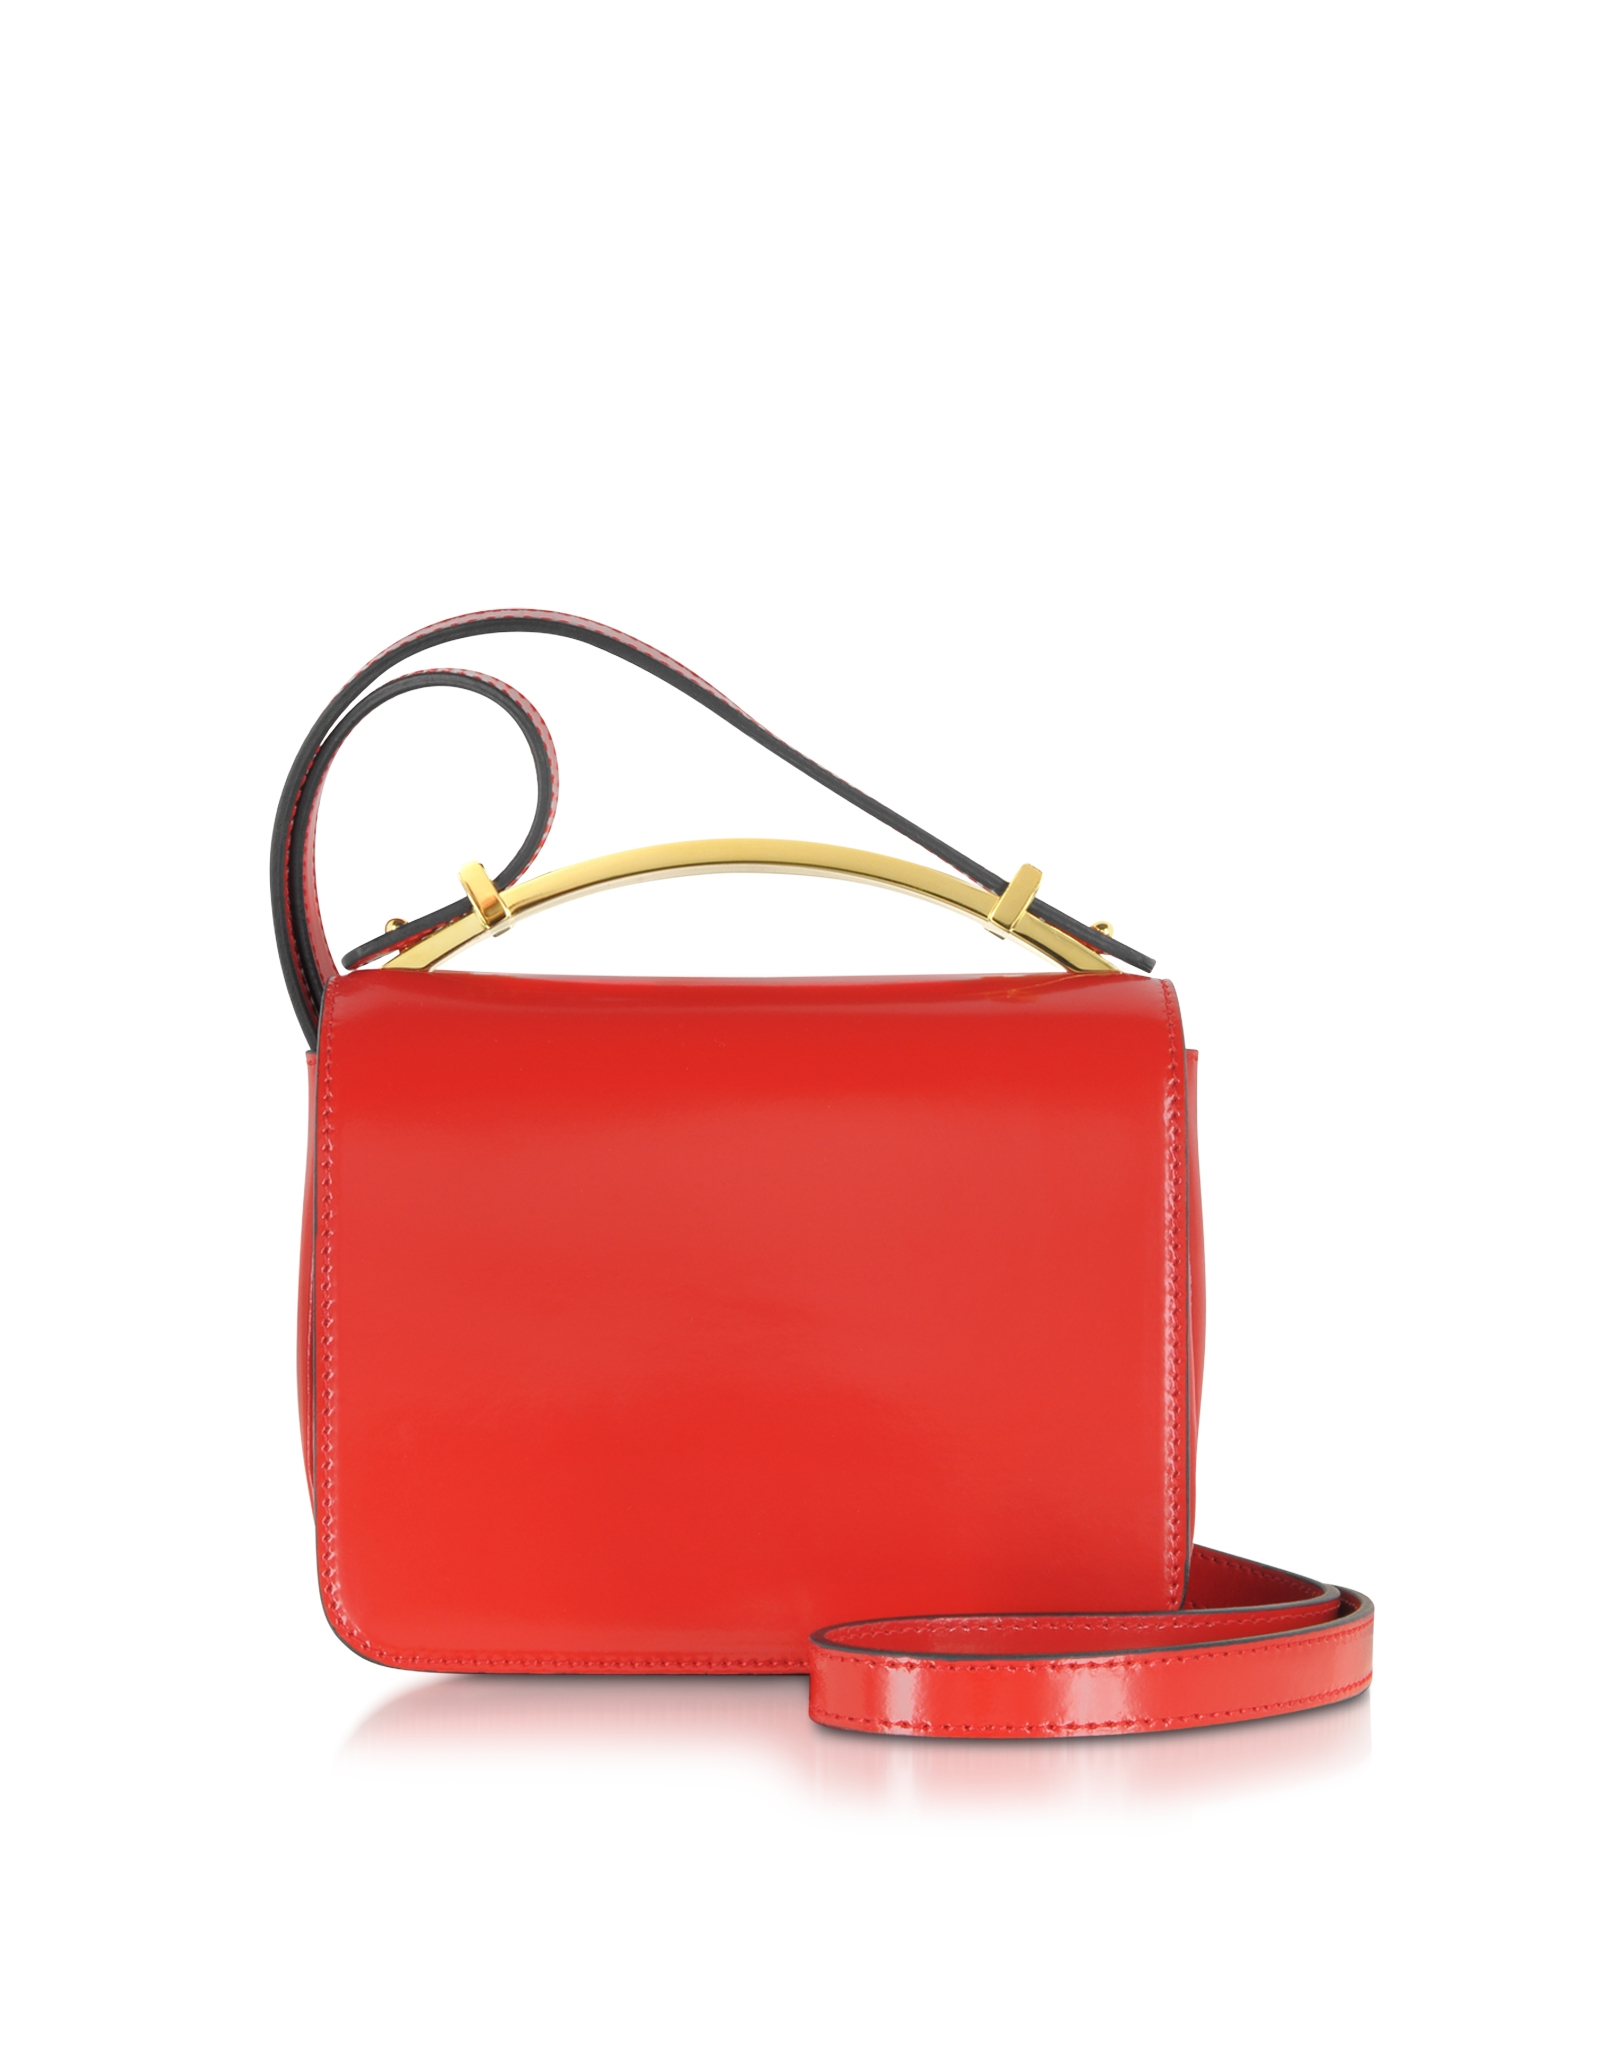 Marni Hot Red Sculpture Bag in Red | Lyst